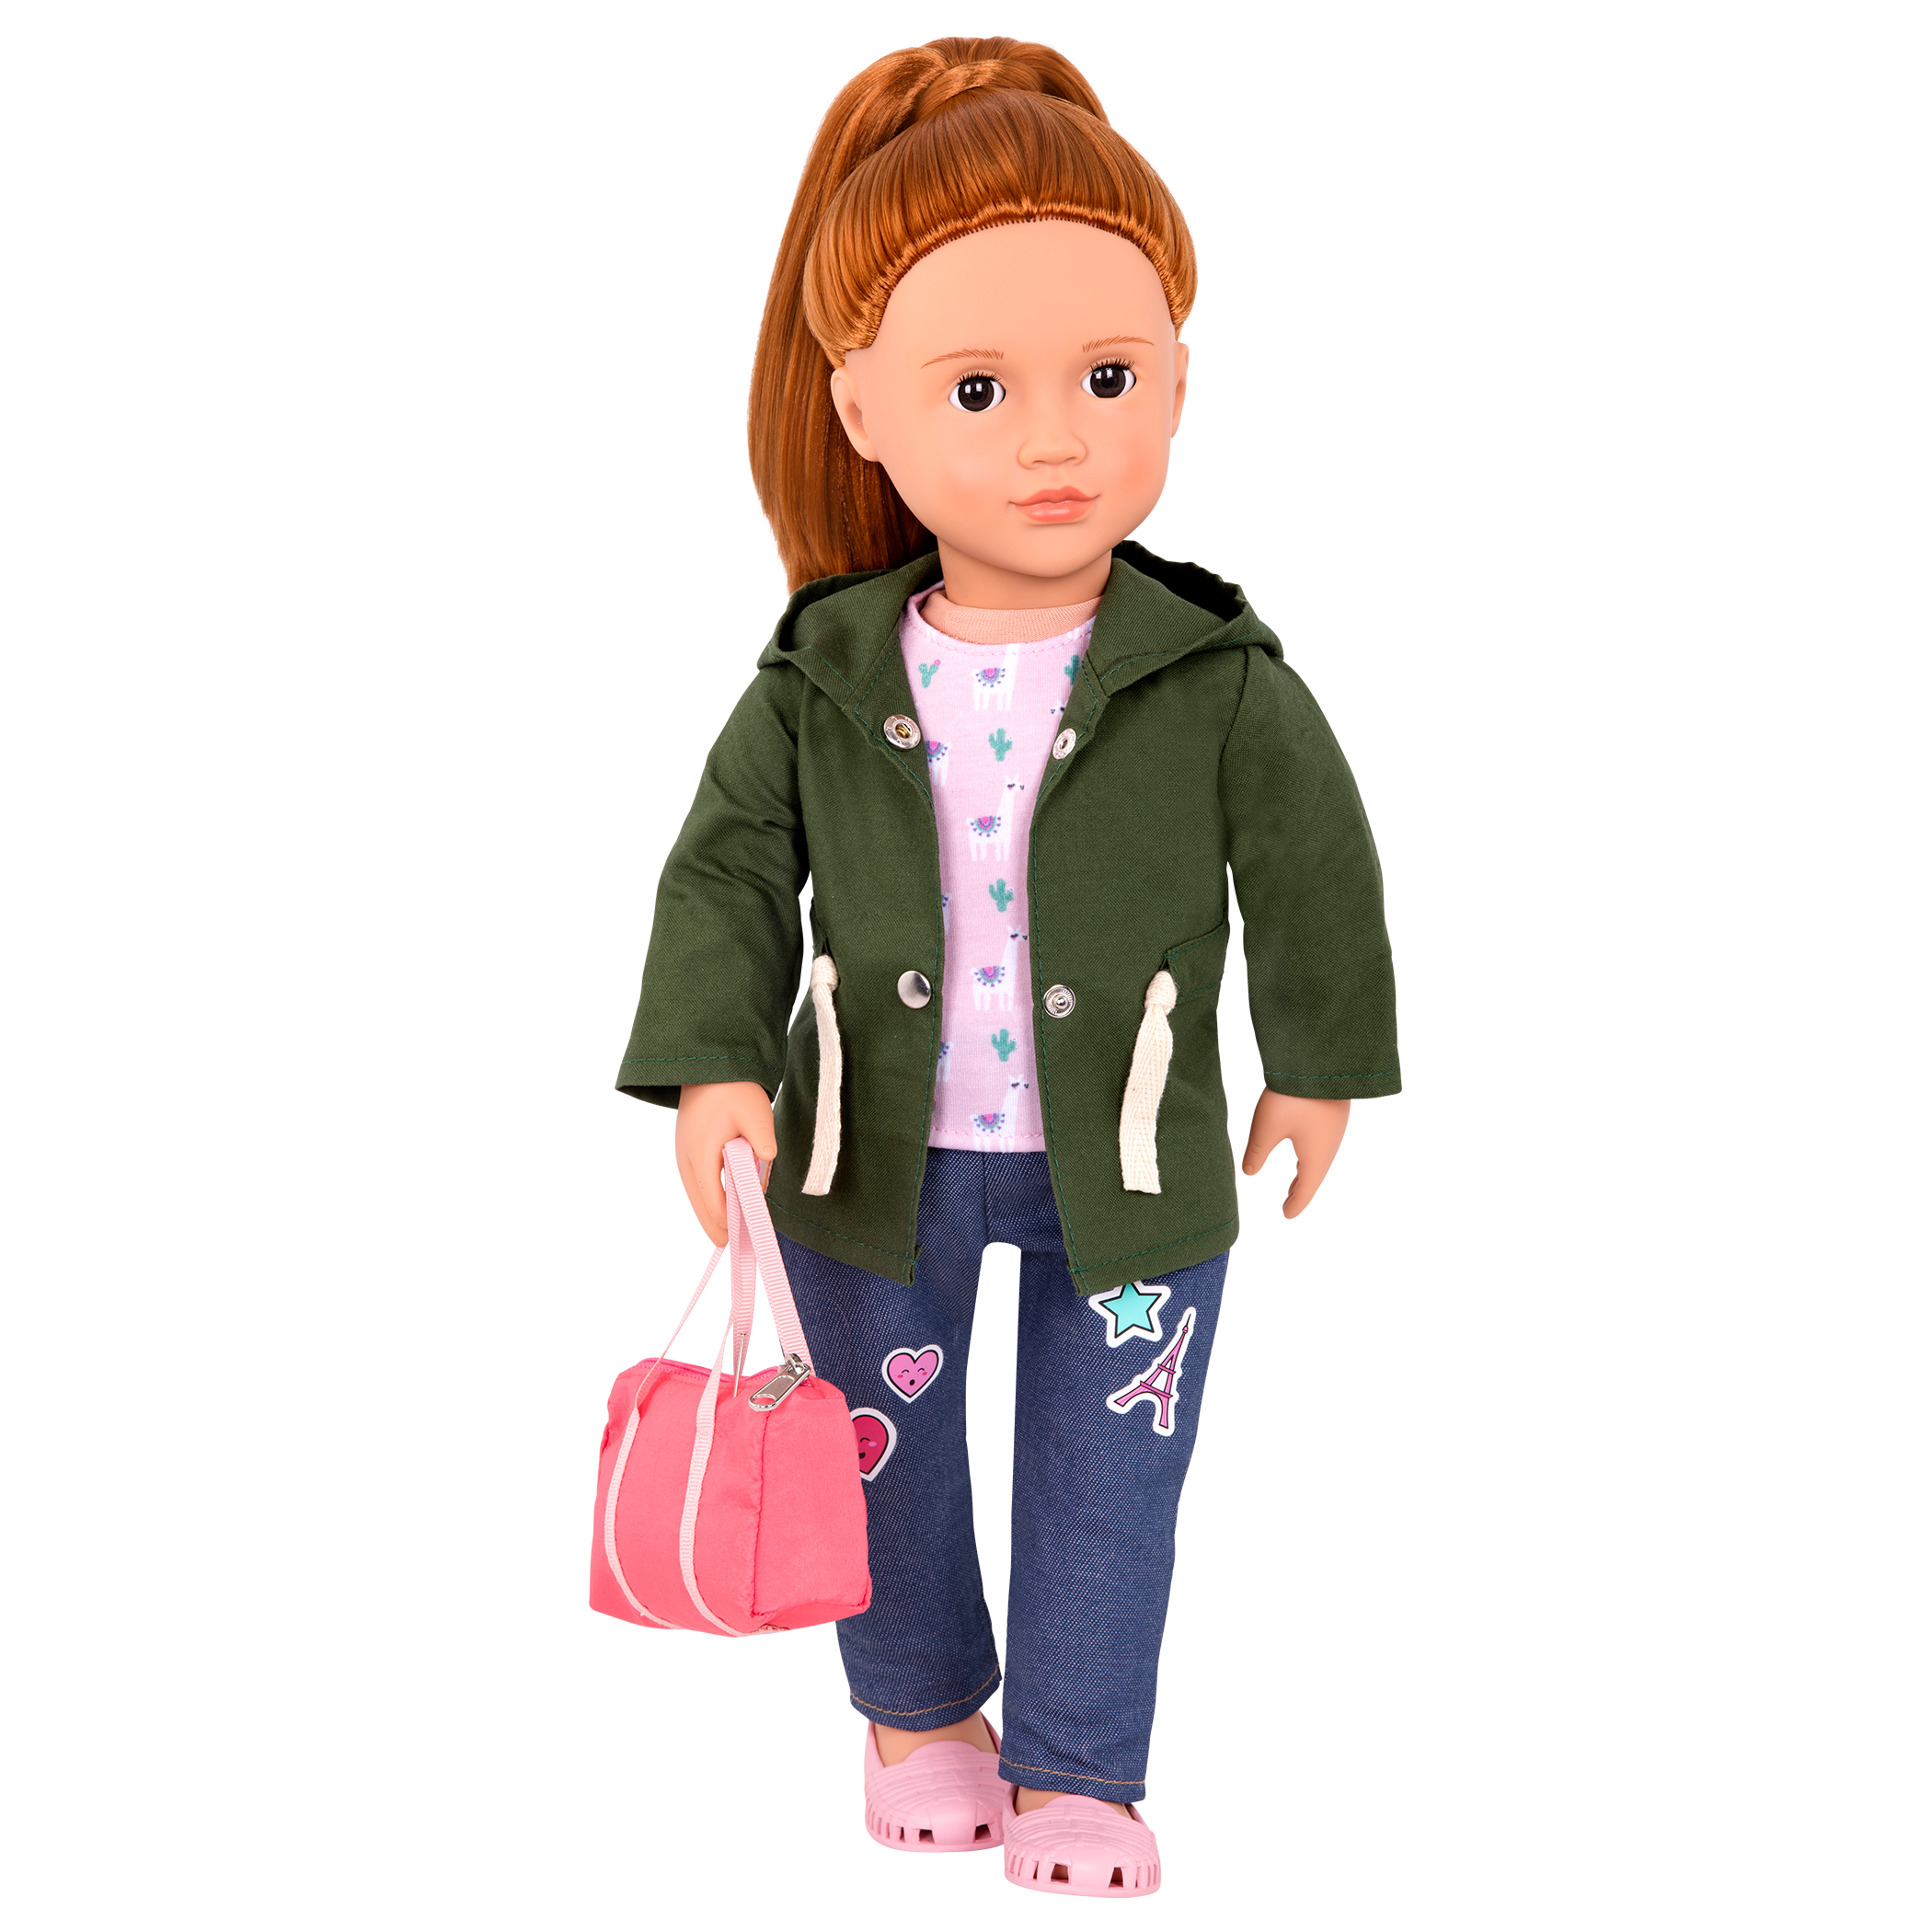 Alpaca-themed travel outfit with duffel bag for 18-inch doll